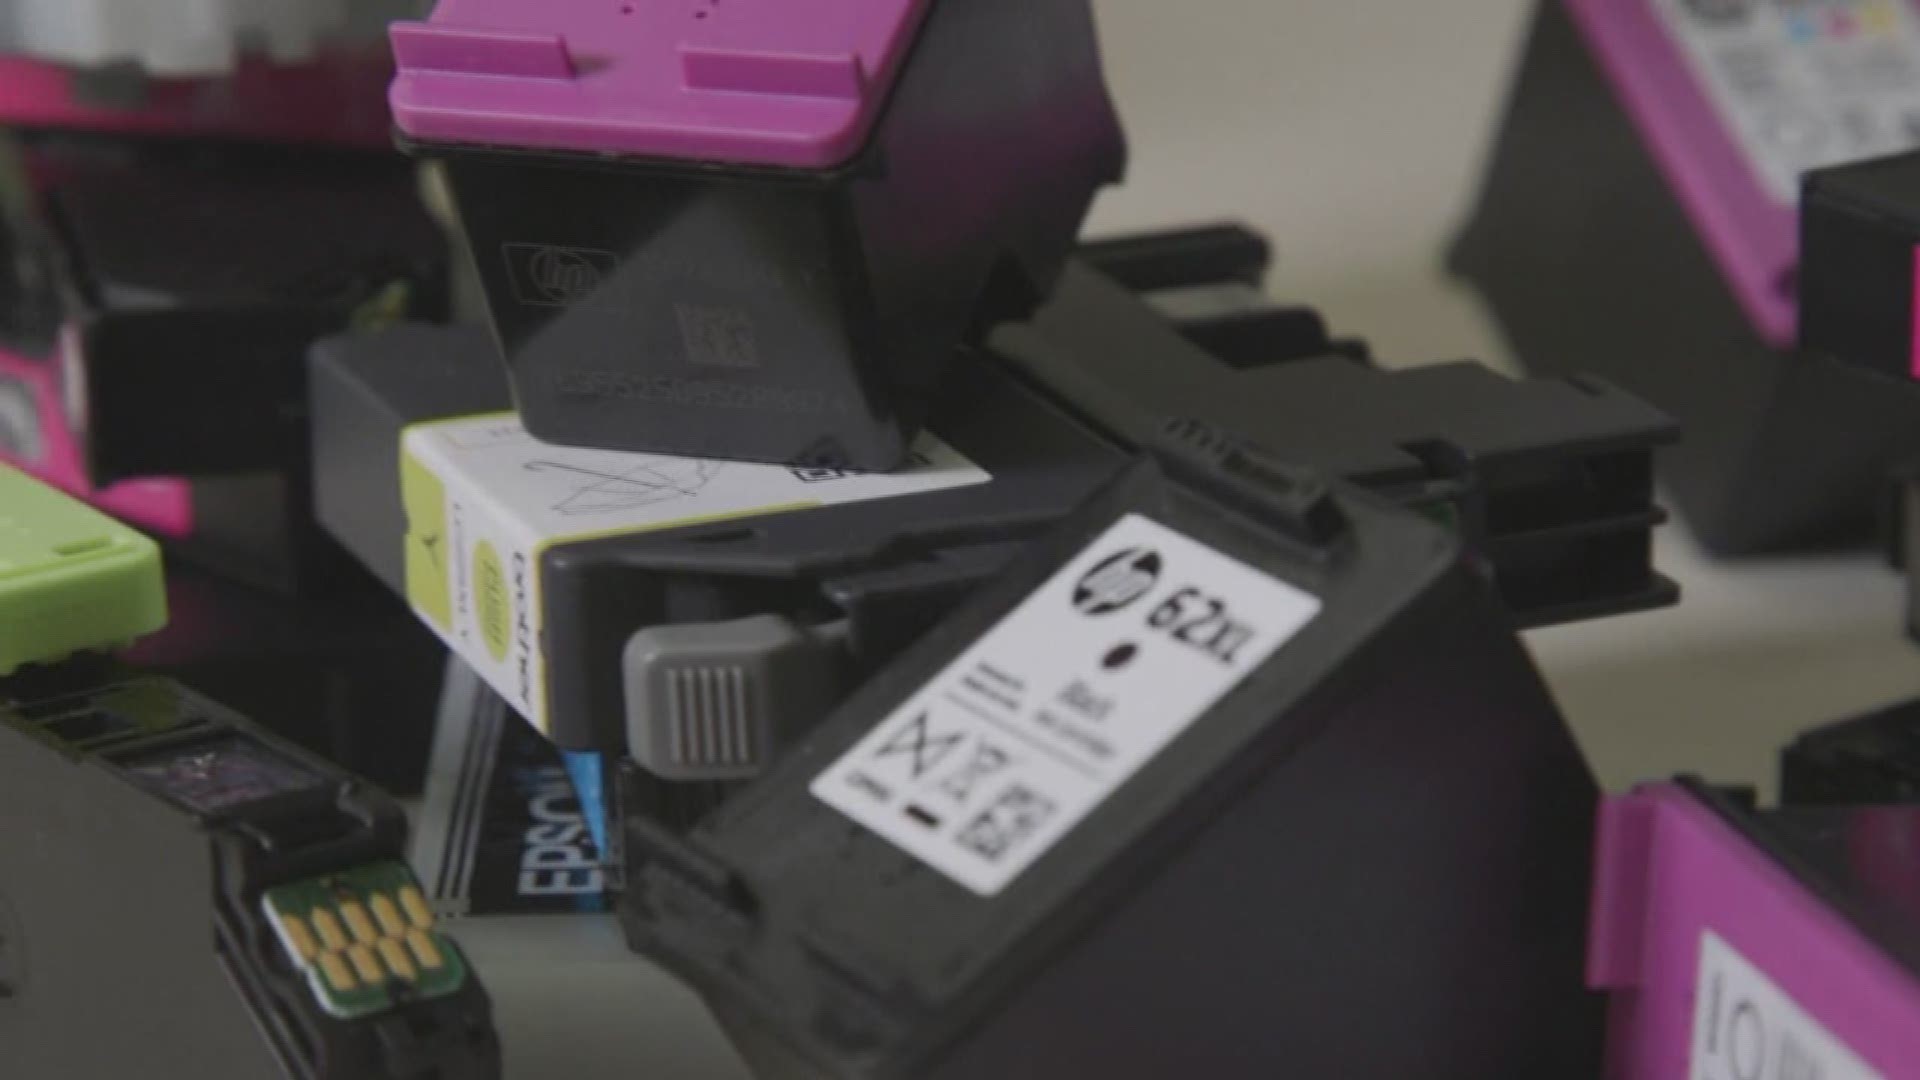 Consumer Reports looks at the cost of replacing ink cartridges to determine overall cost.